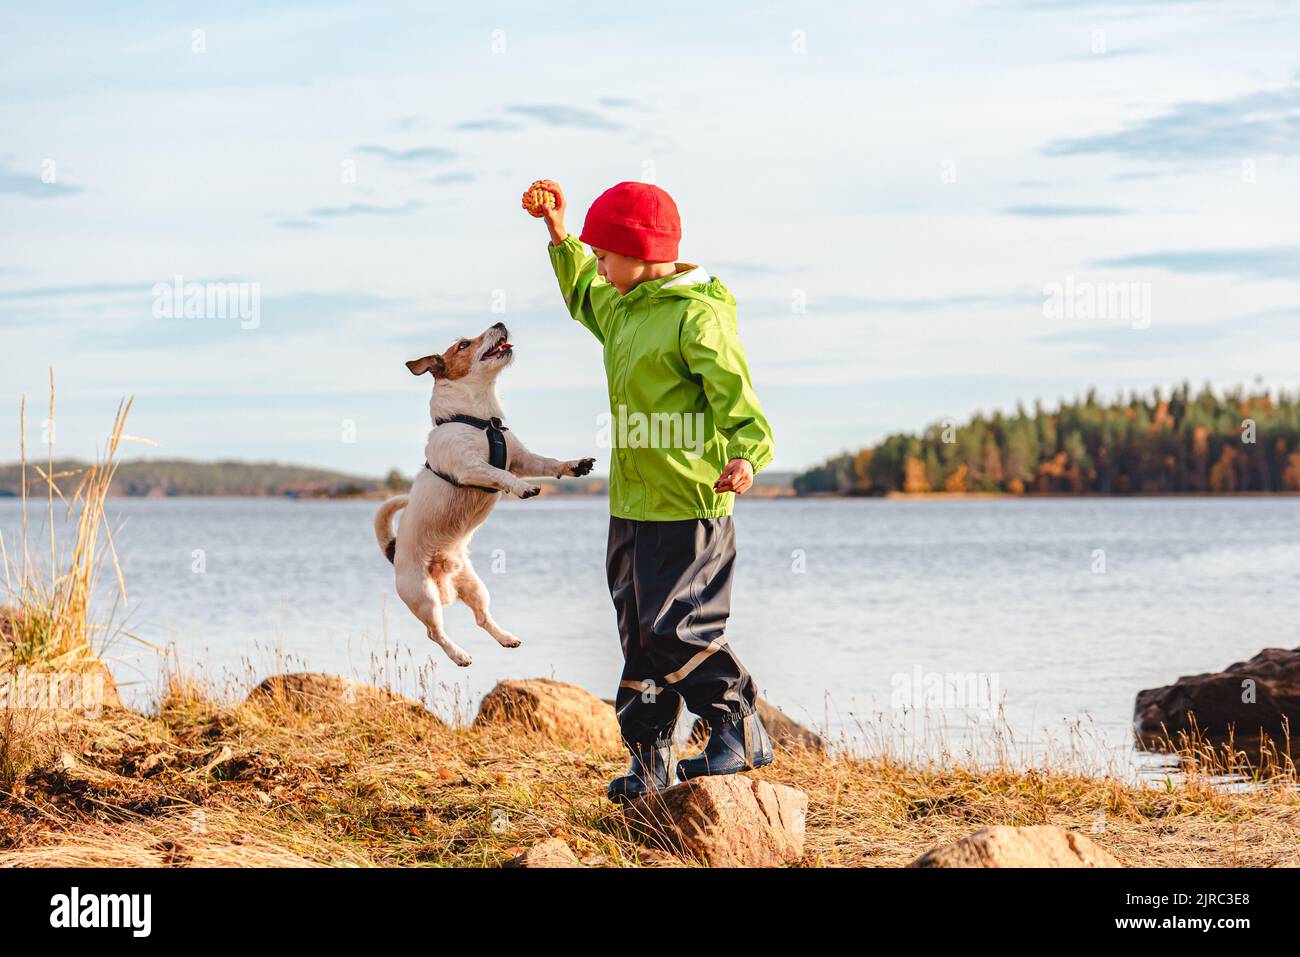 Kid boy balancing on stone playing with dog jumping high for toy. Family rests on beach on Autumn day Stock Photo